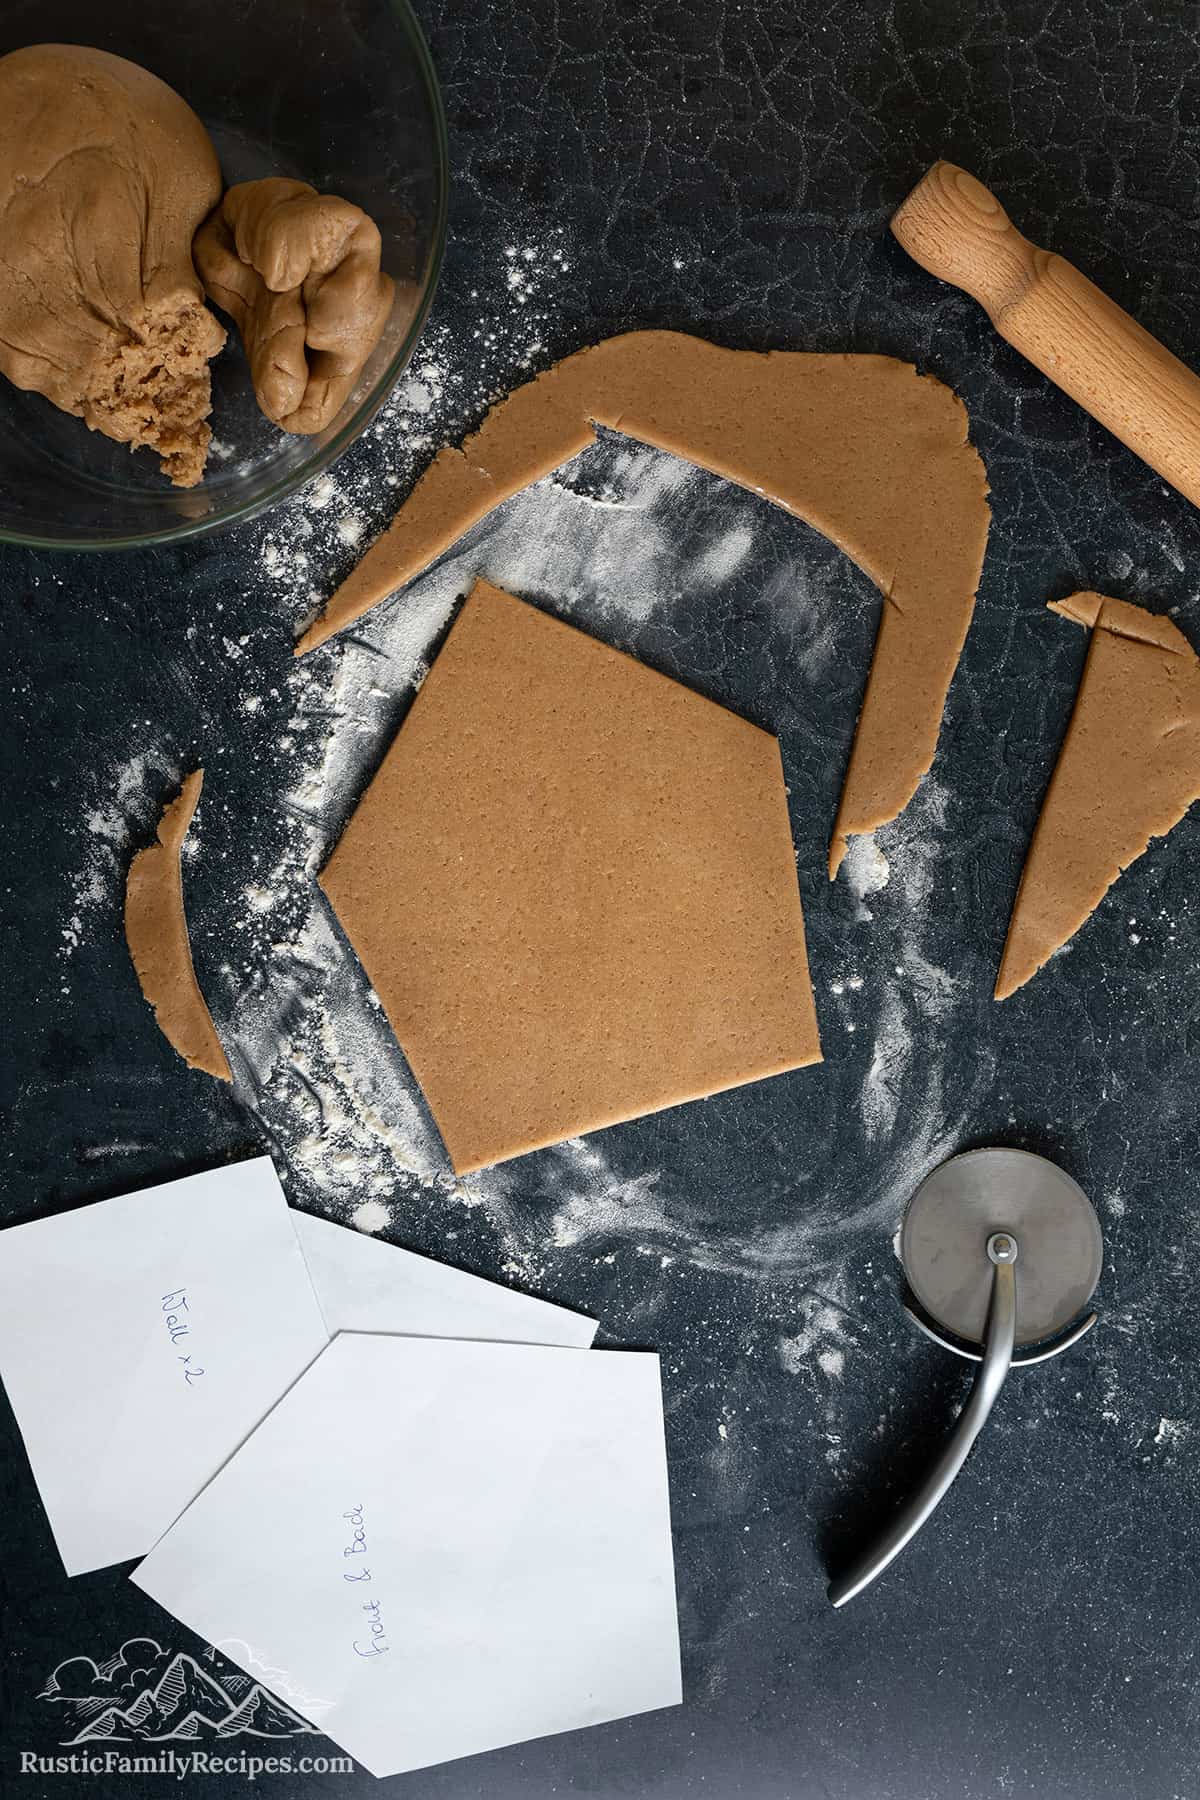 Dough shapes cut using the template.